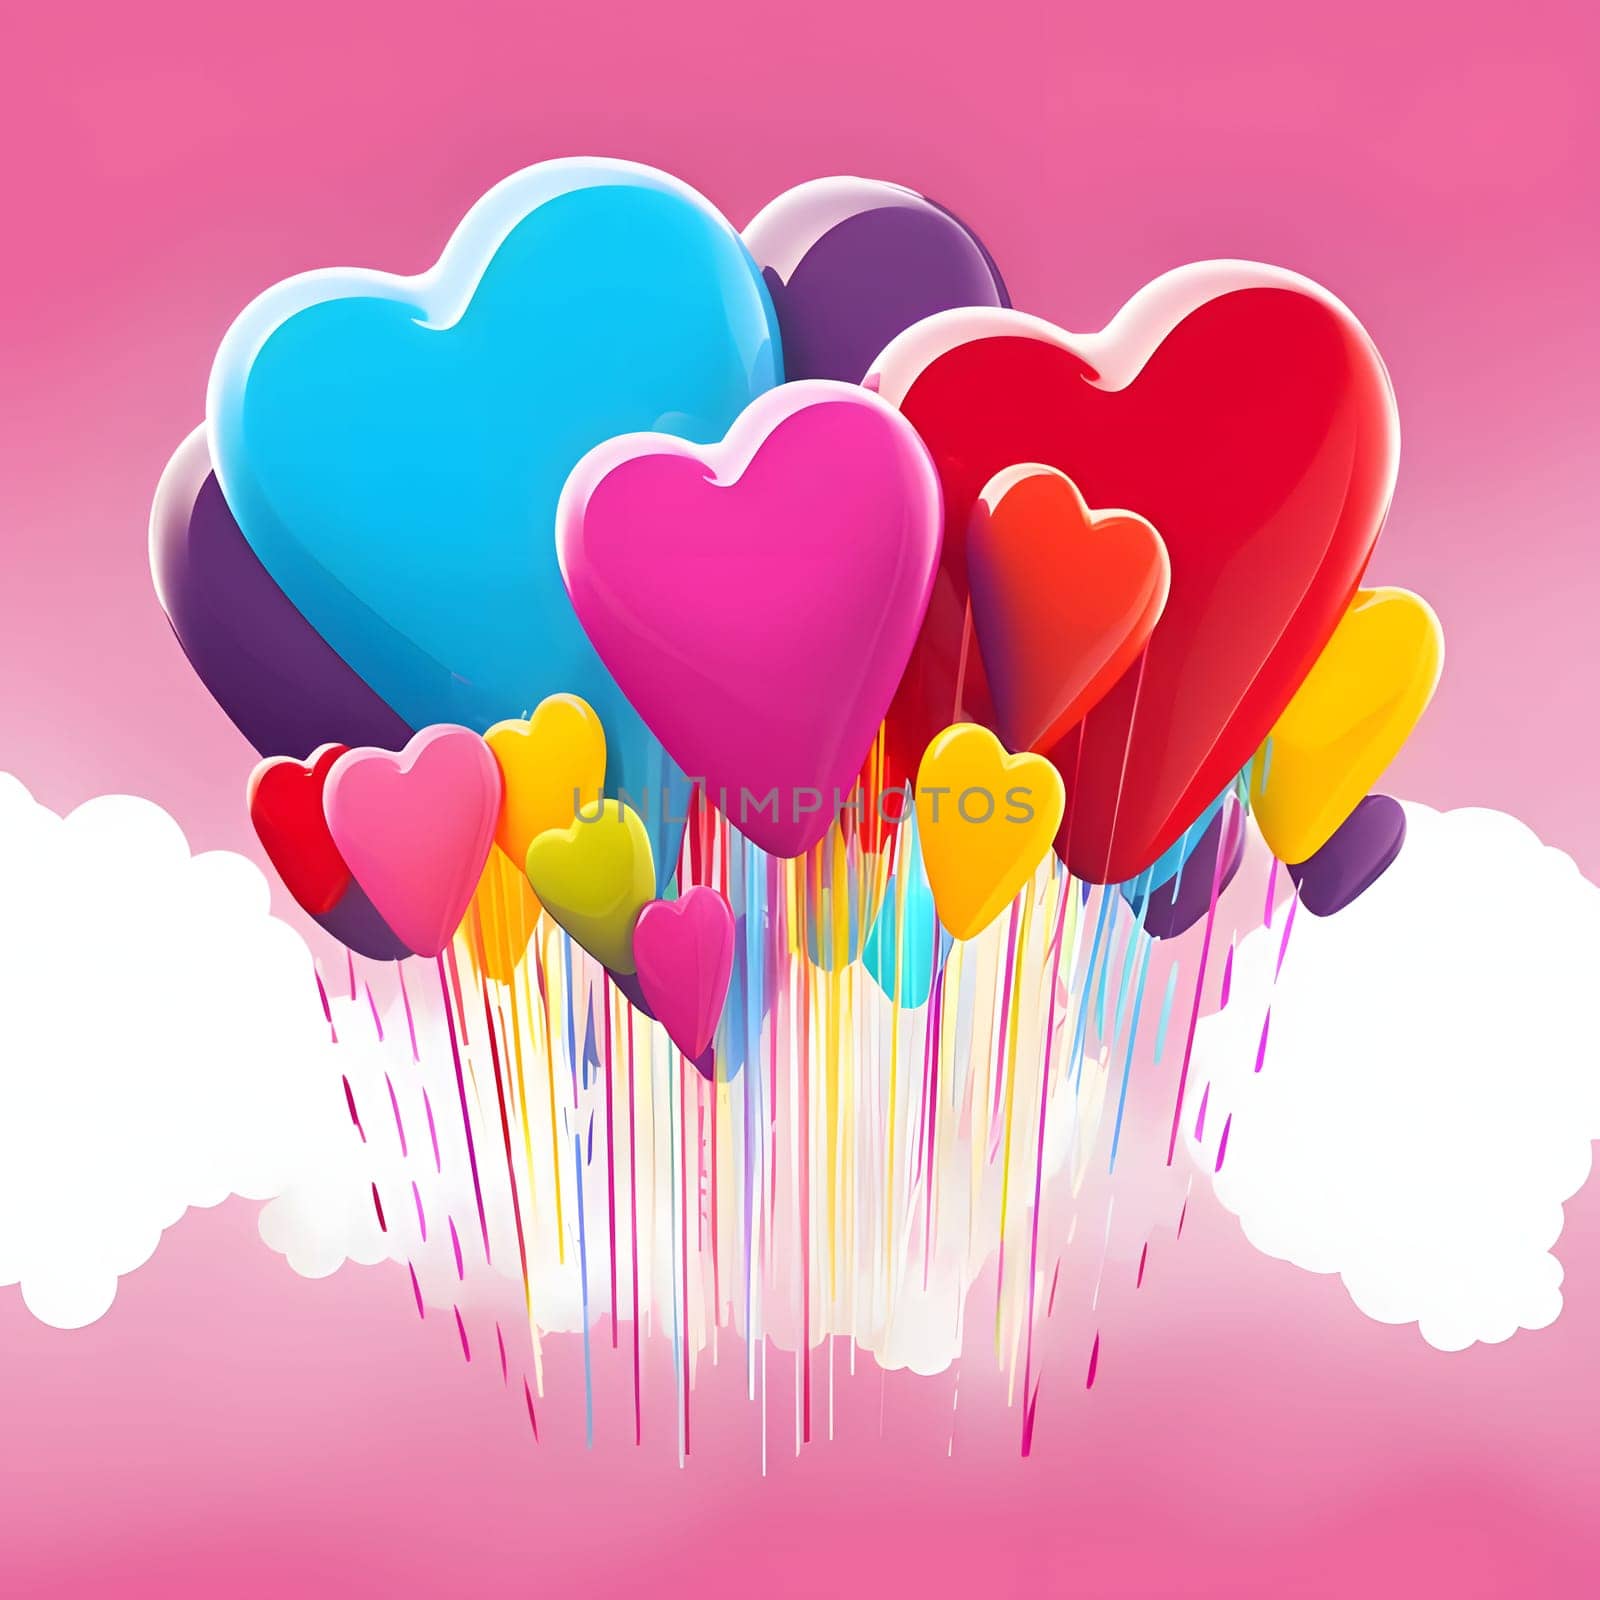 Rainbow colored heart-shaped balloons abstract composition. Heart as a symbol of affection and love. by ThemesS